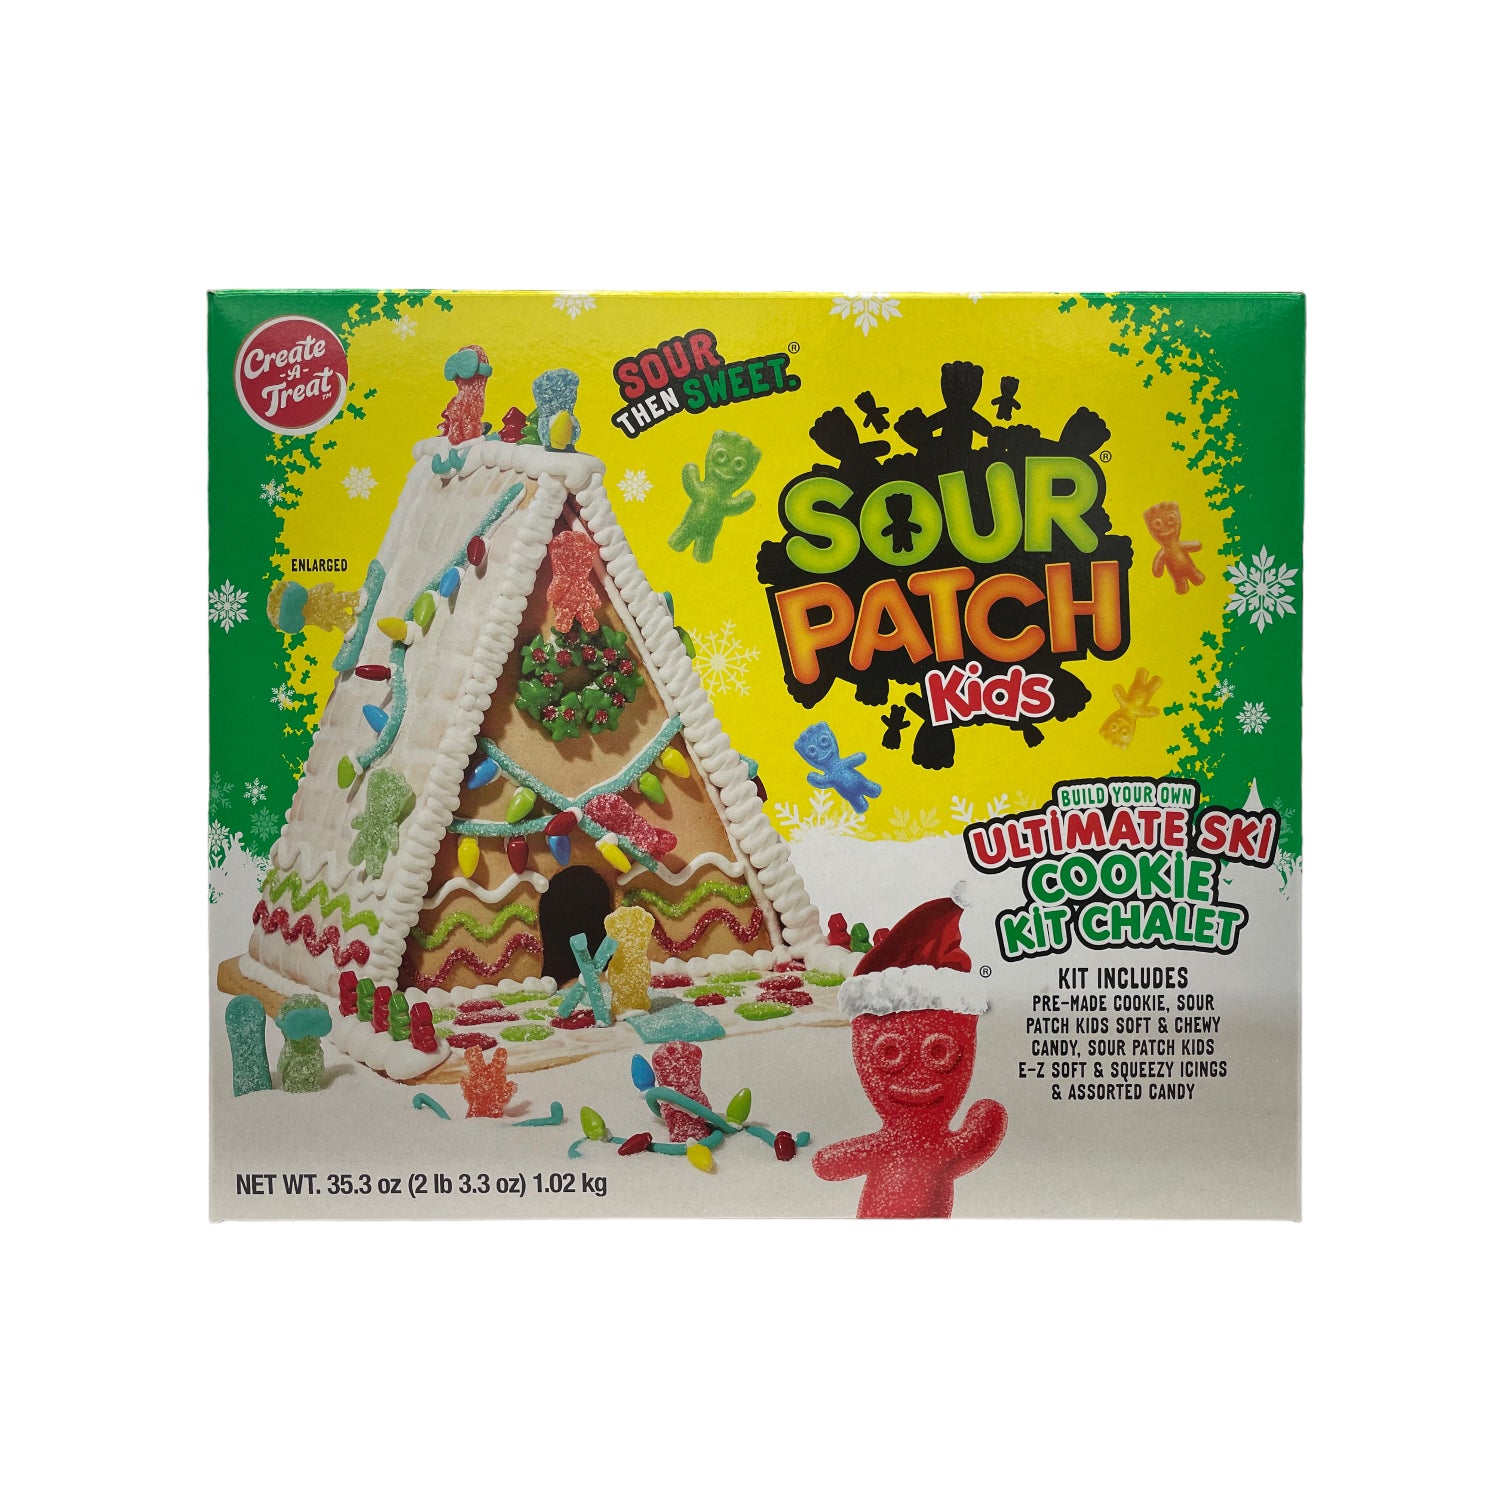 Sour Patch Gingerbread house Kit